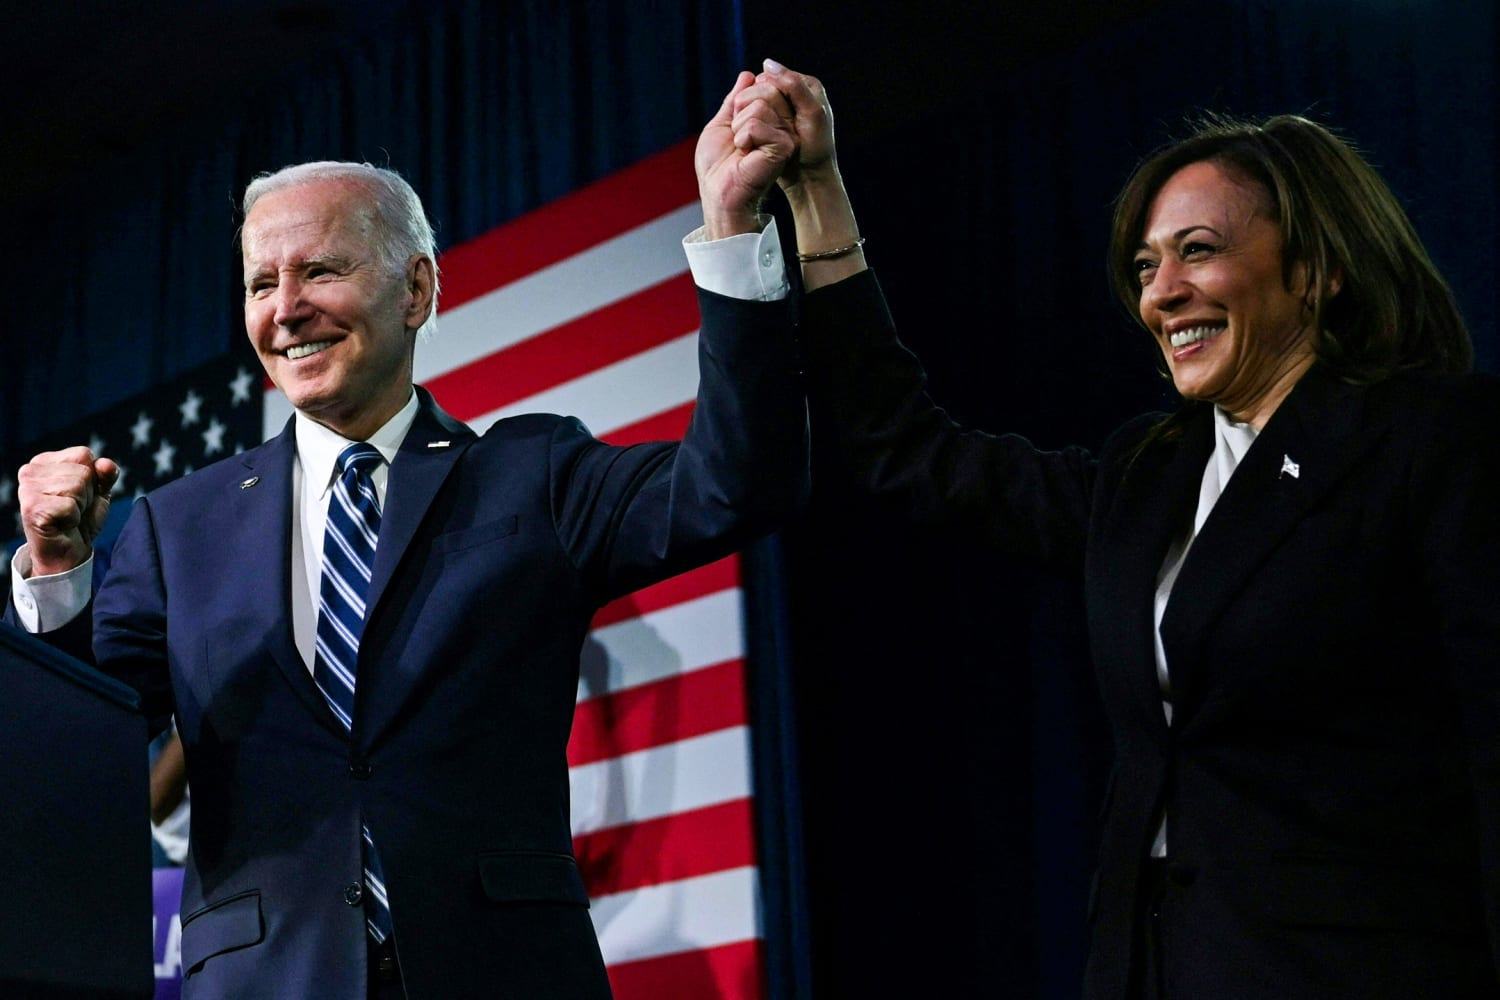 Biden campaign memo: ‘Number of viable pathways’ to 2024 victory